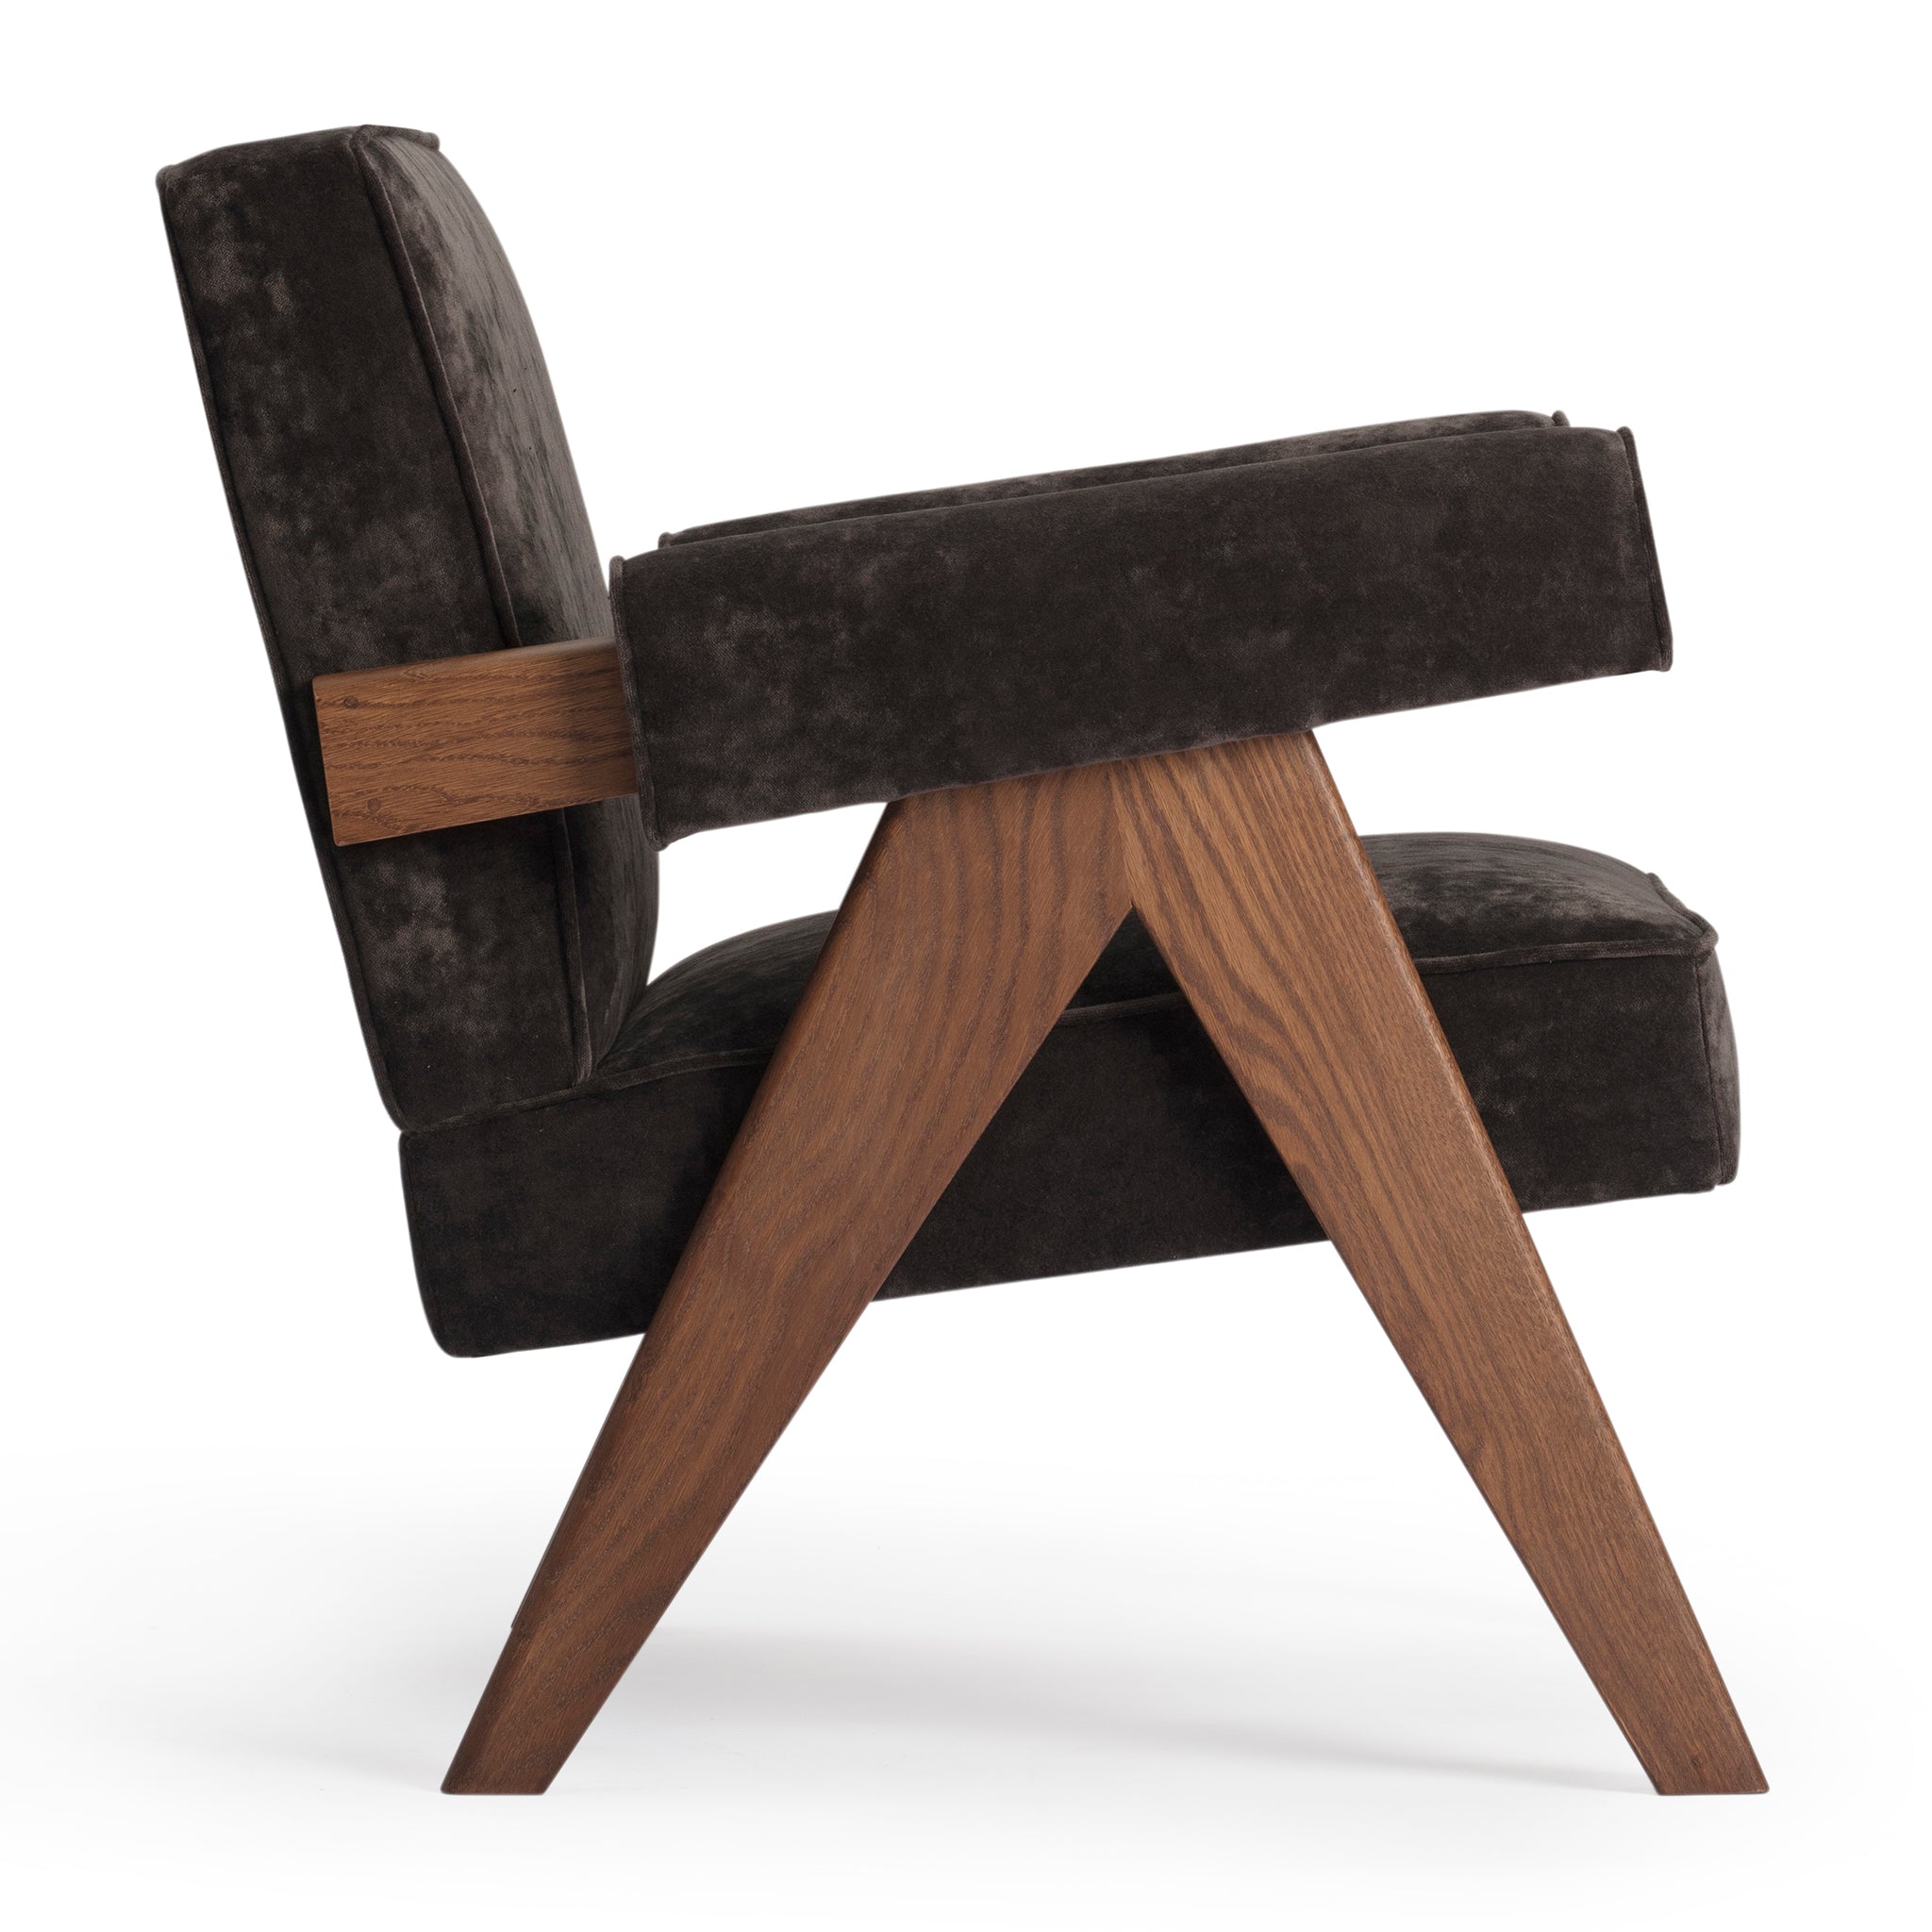 Side view of an authentic chandigarh lounge chair, pierre jeanneret era, walnut oak frame, chocolate brown mohair upholstery, by Klarel #K35-15